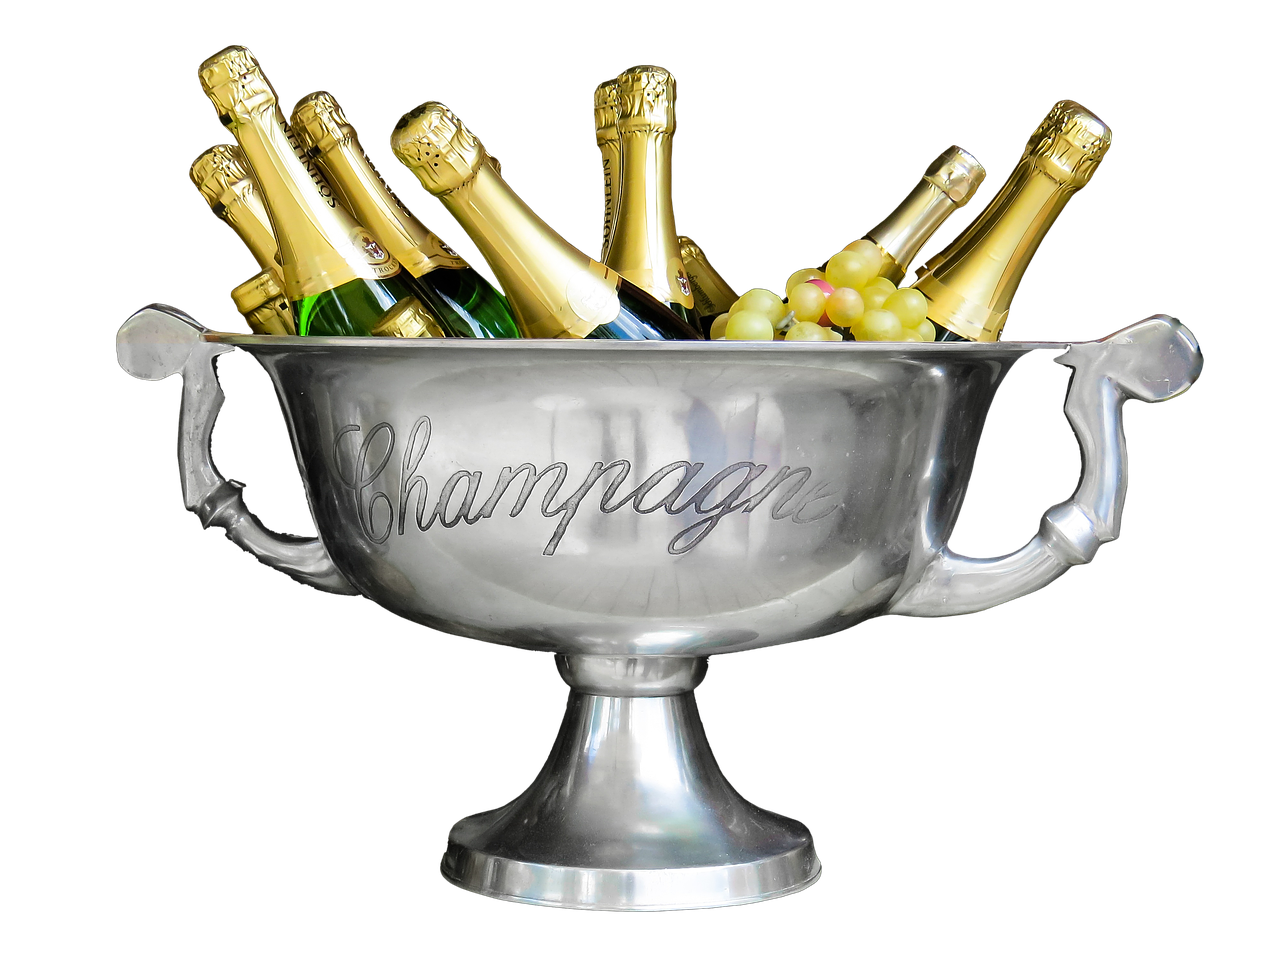 A Silver Bowl With Bottles Of Champagne And Grapes